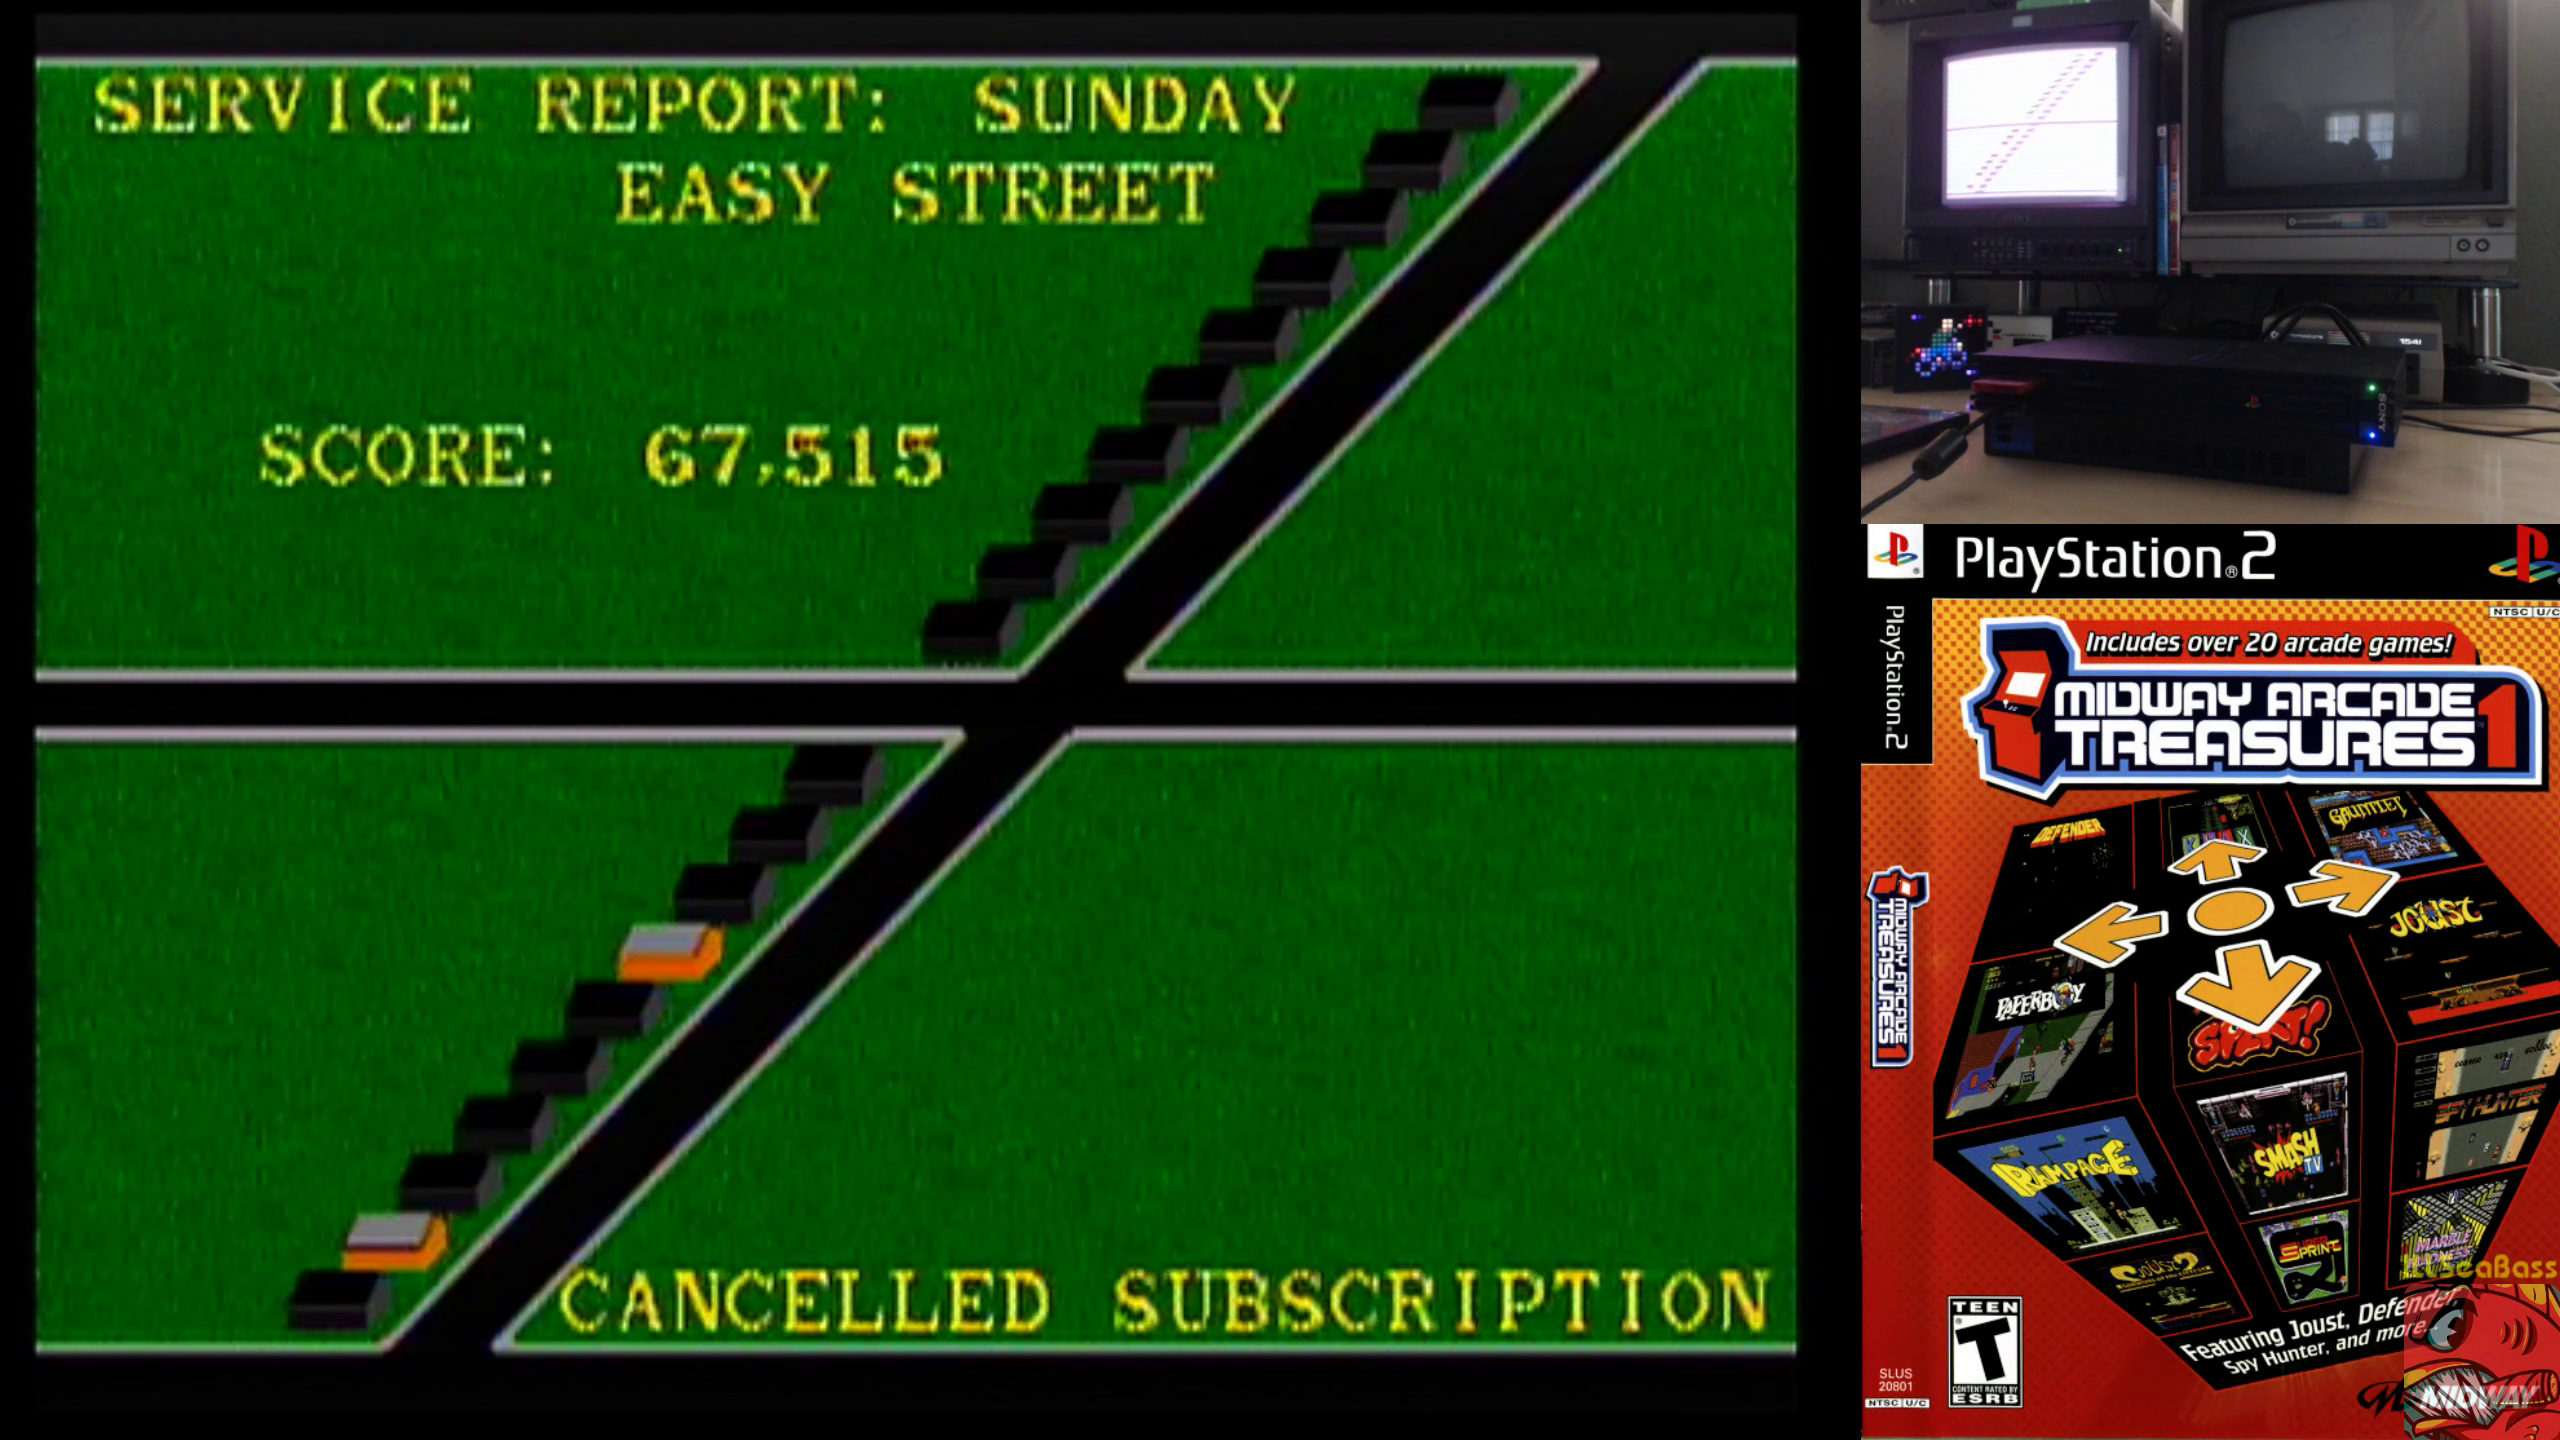 ILLSeaBass: Midway Arcade Treasures: Paperboy (Playstation 2) 67,515 points on 2019-06-17 20:28:52